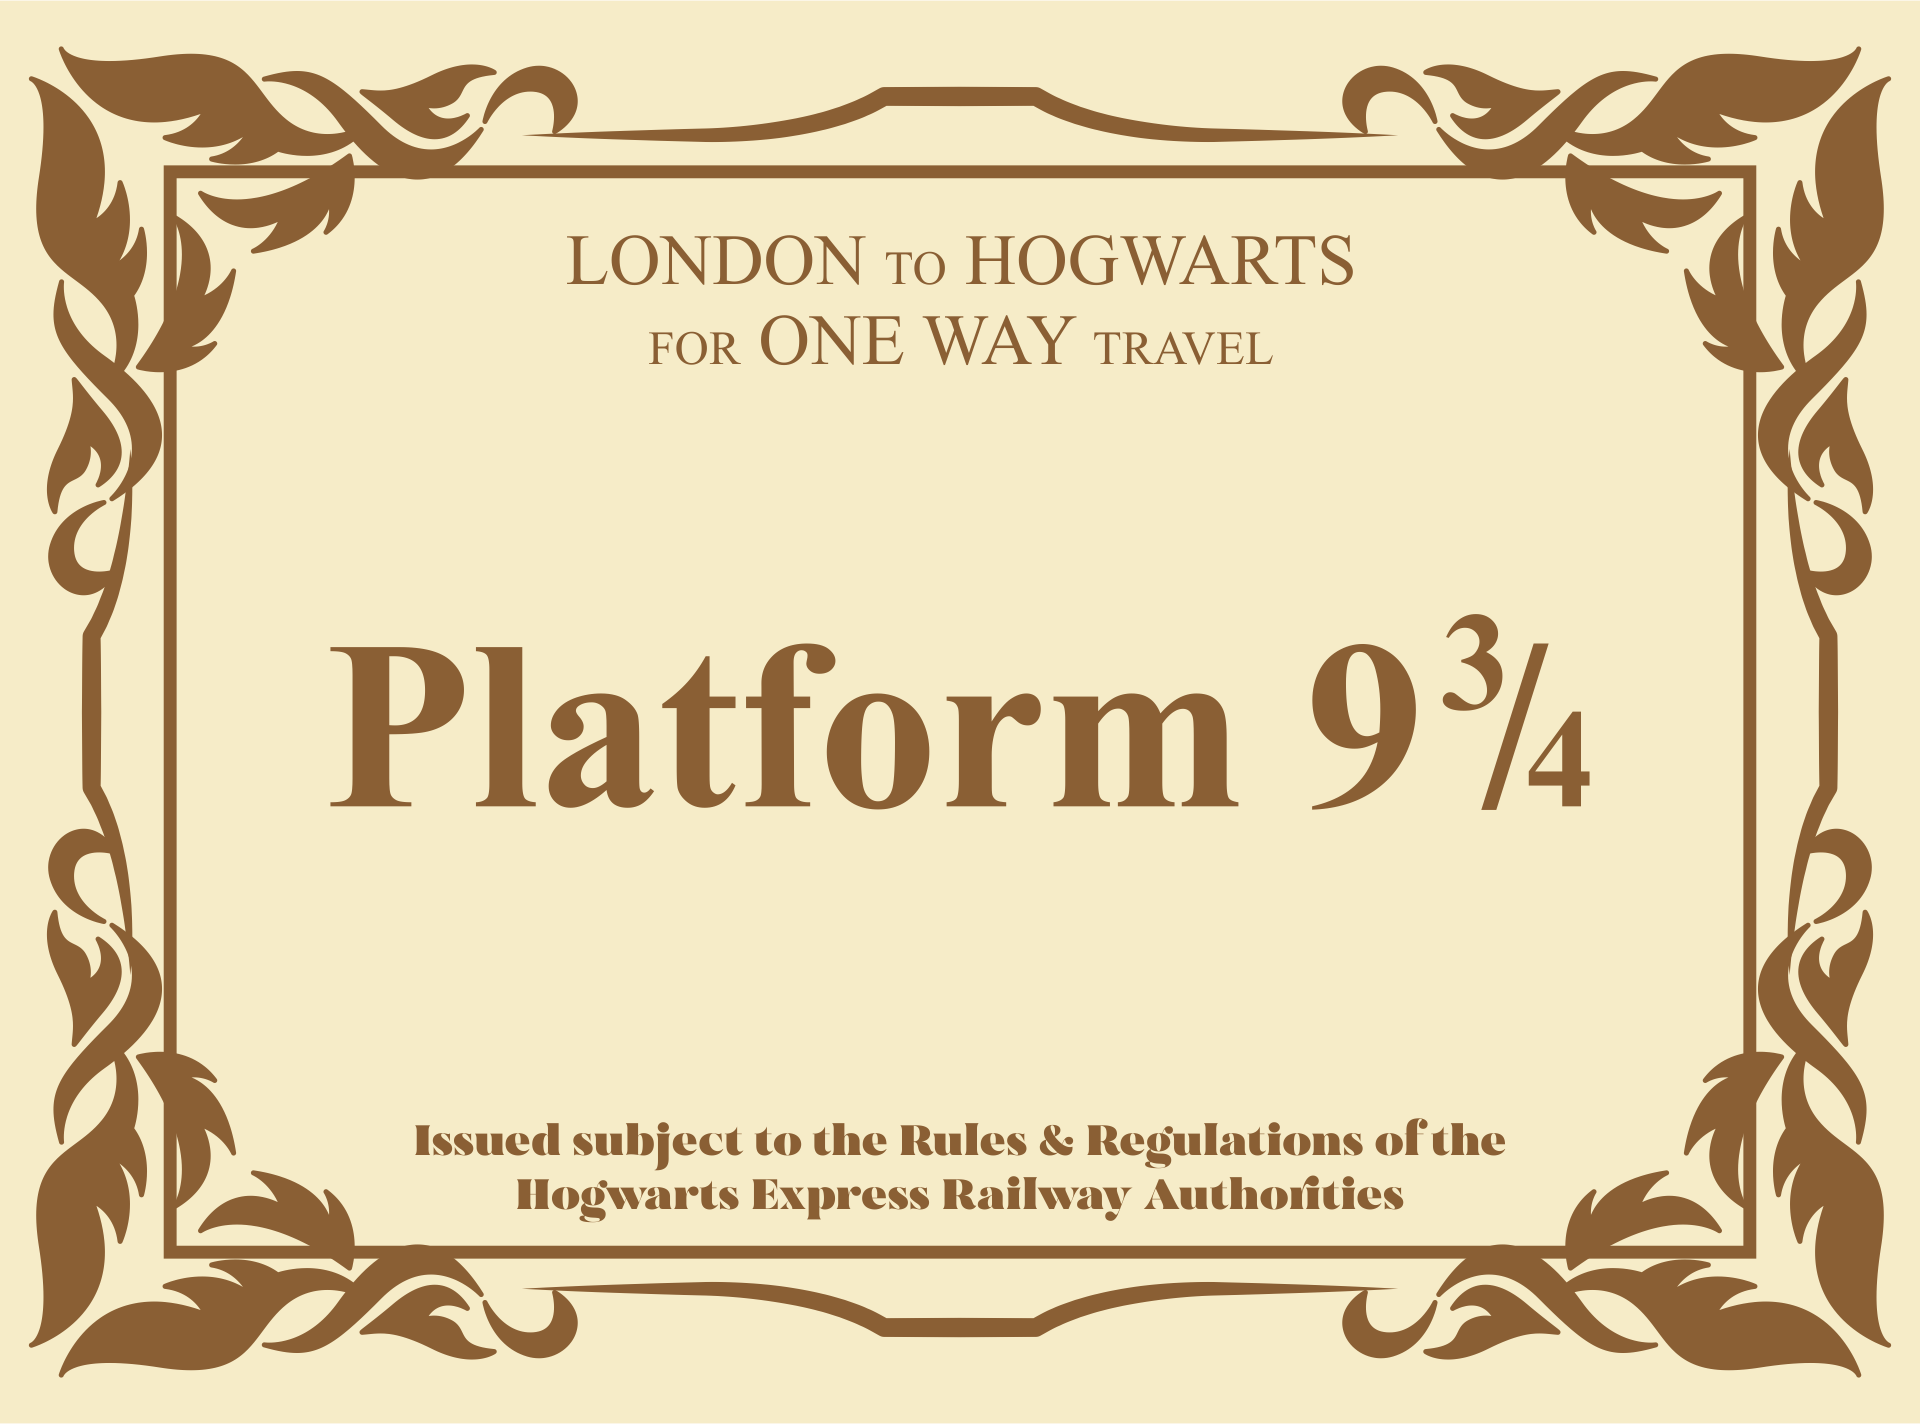 7 Best Images of Printable Train Ticket Harry Potter Harry Potter